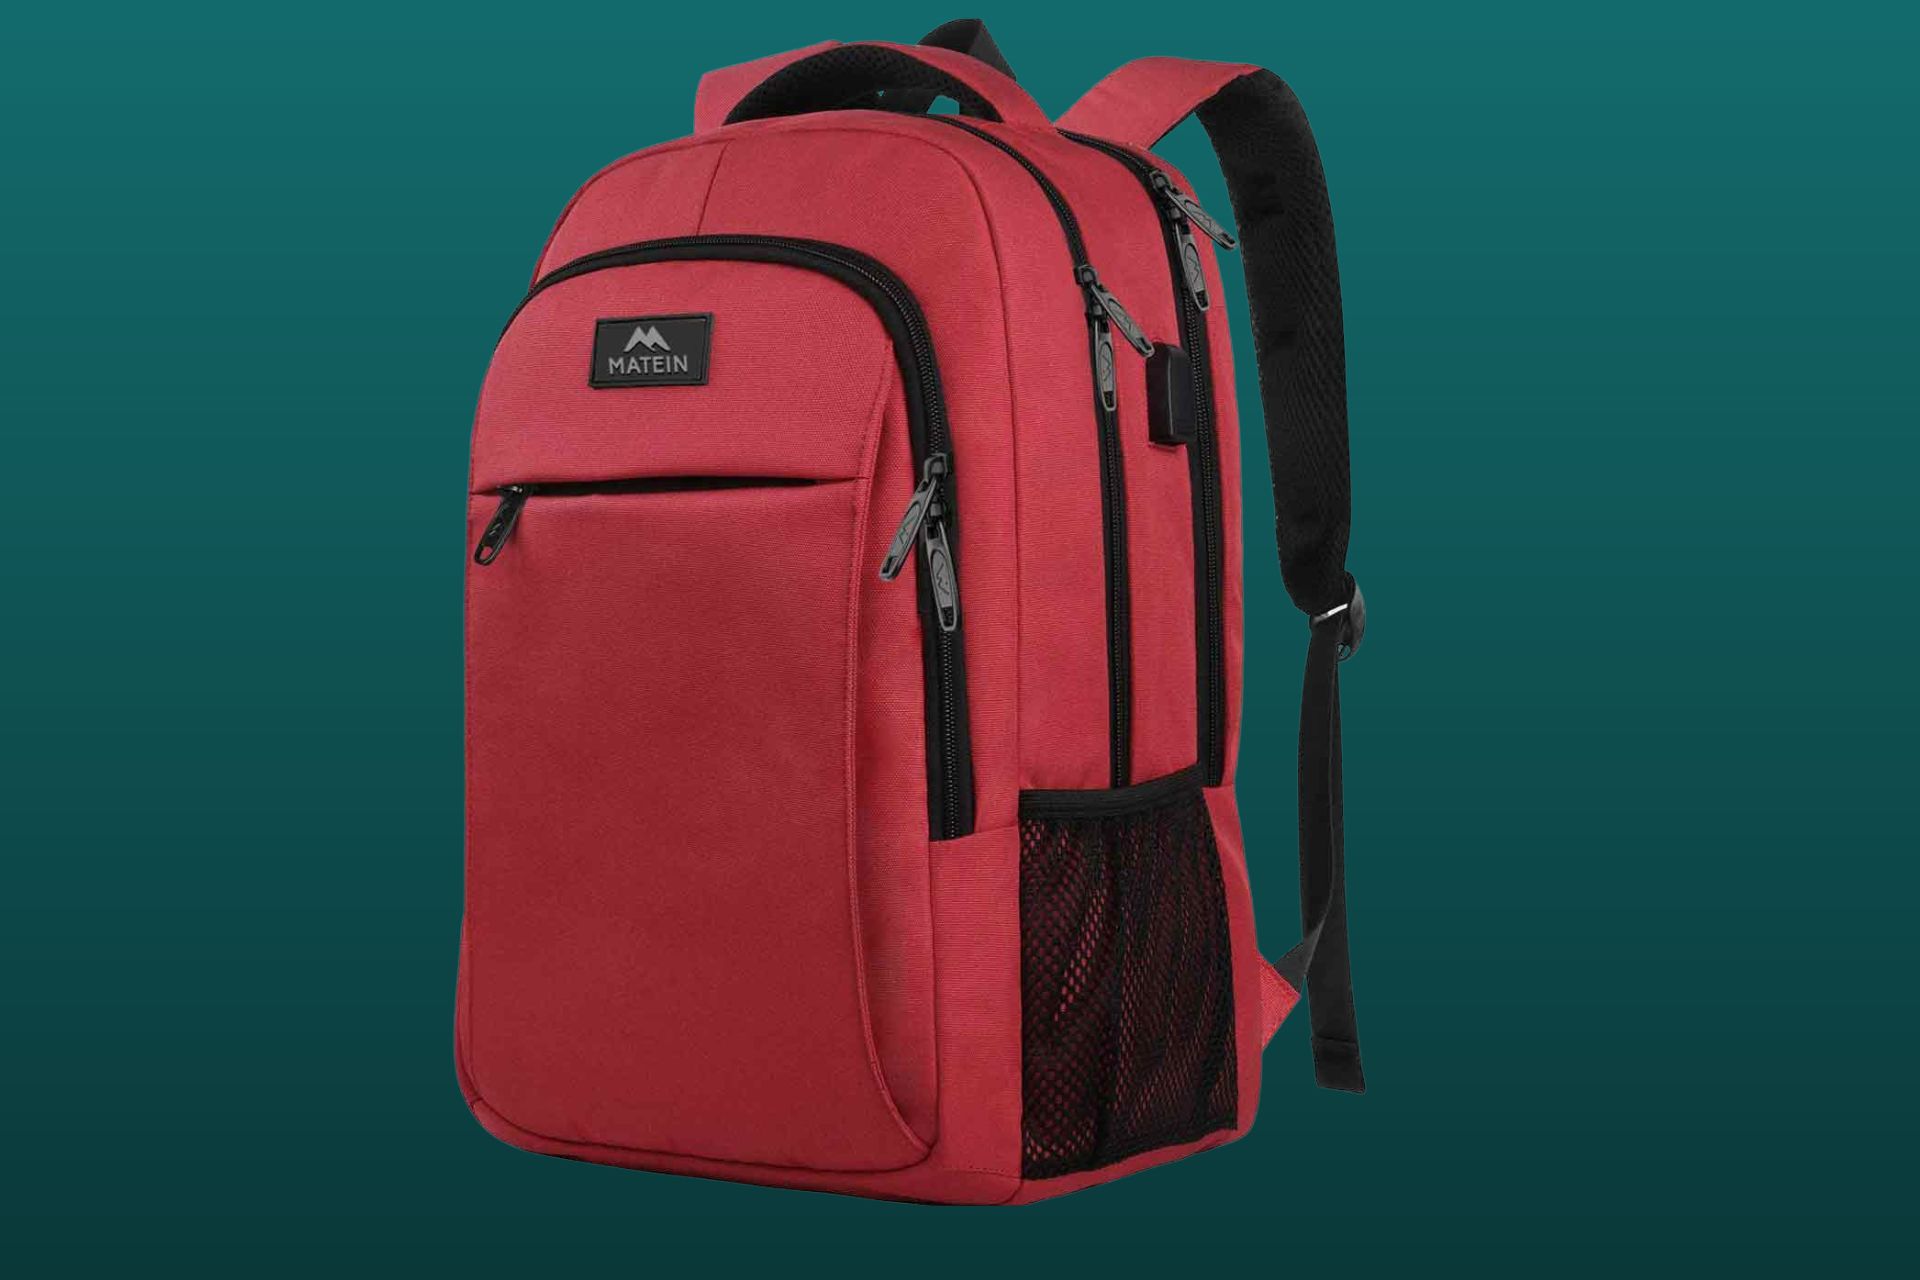 Matein Backpack Review: Is it the Perfect Carry-on?